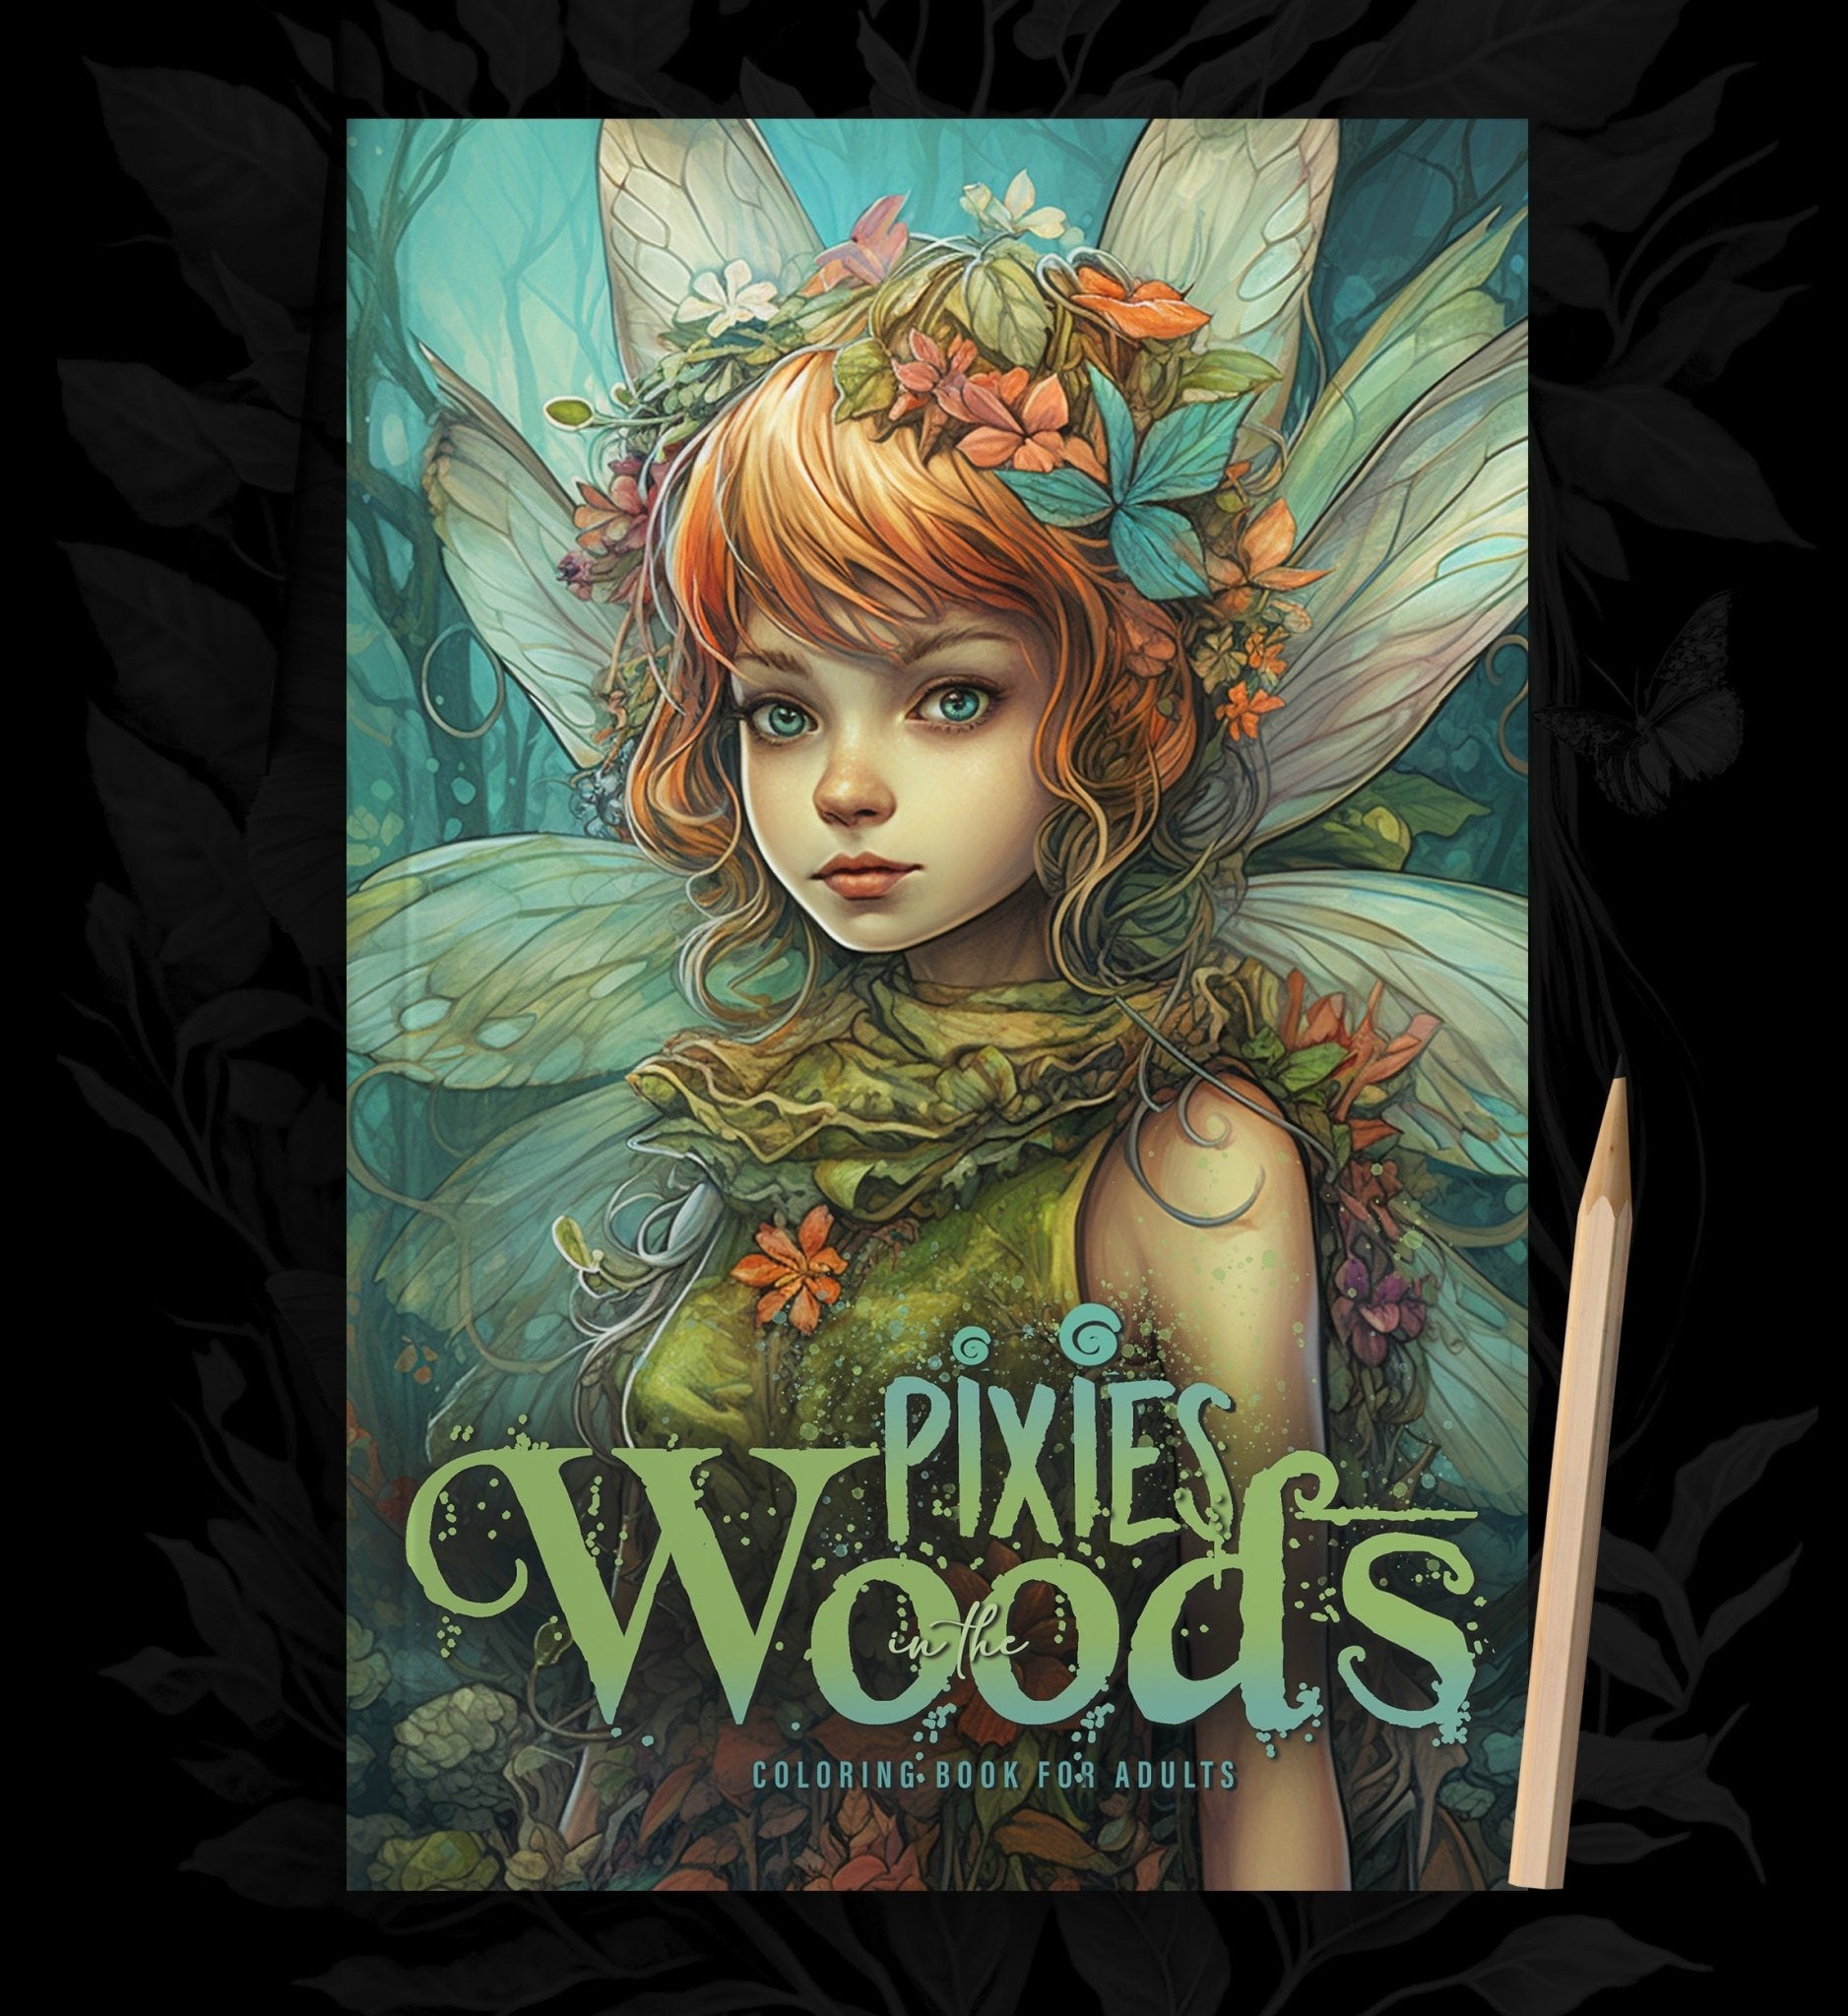 Pixies in the Woods Coloring Book (Printbook) - Monsoon Publishing USA